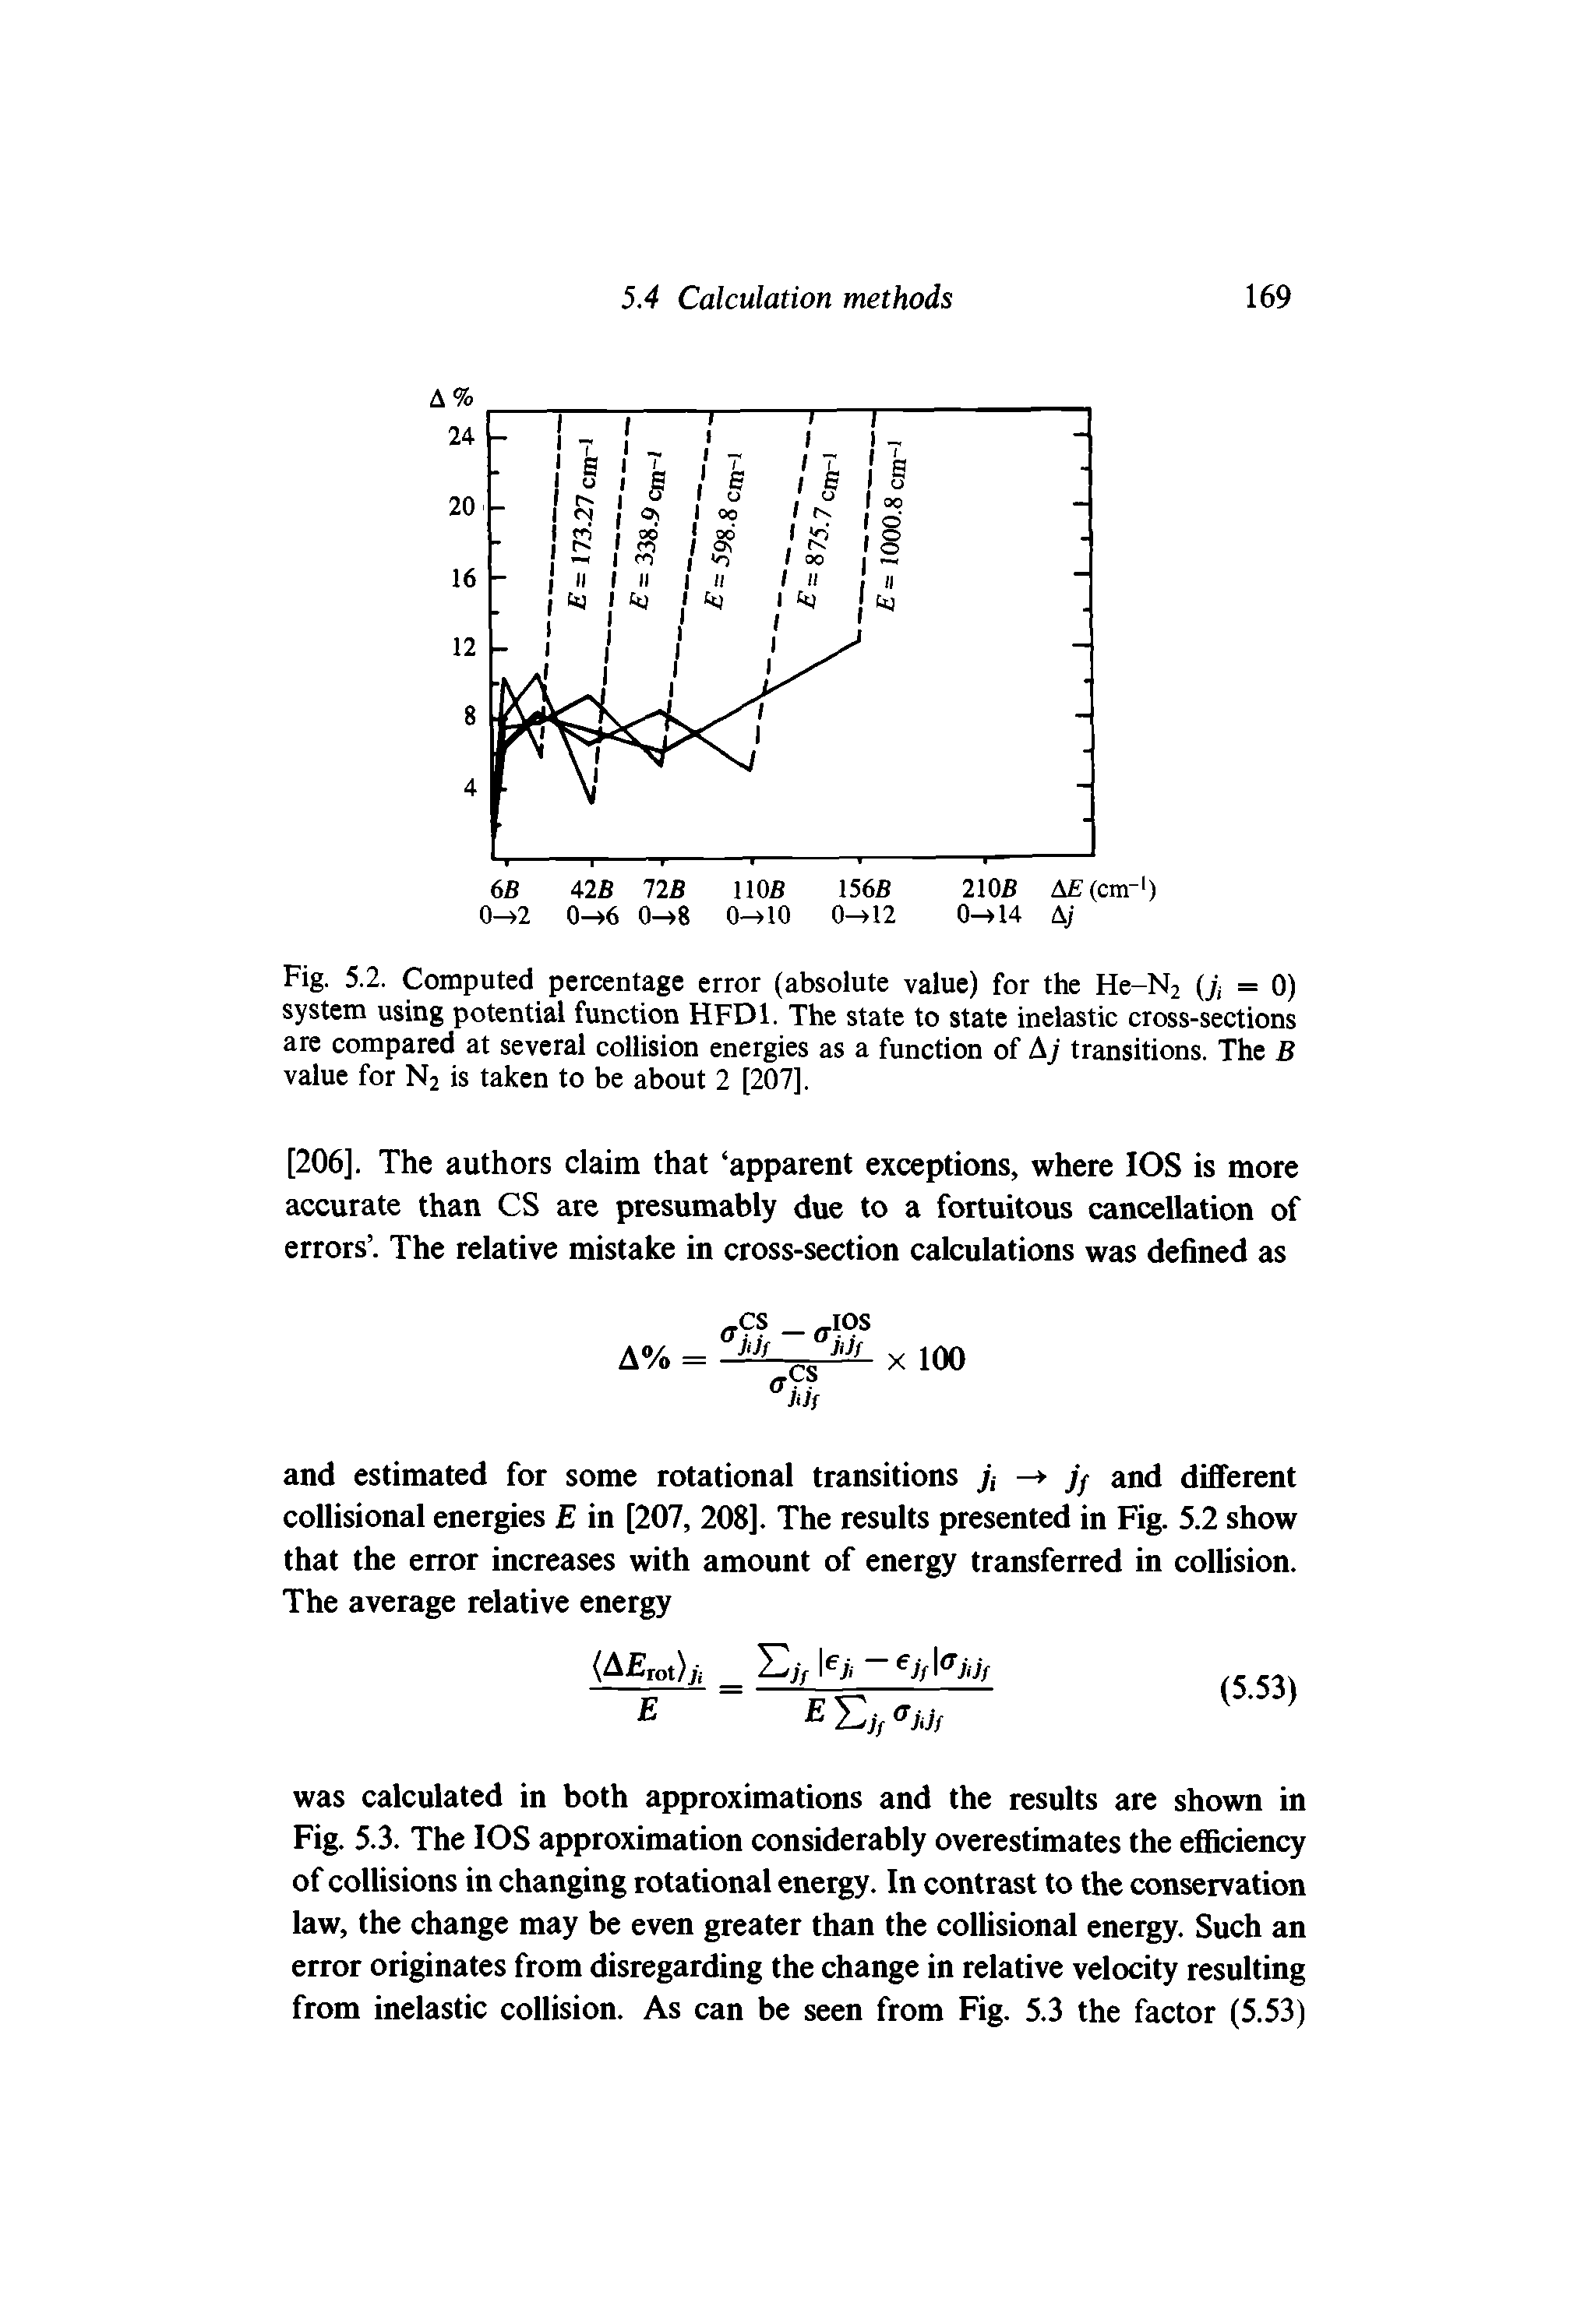 Fig. 5.2. Computed percentage error (absolute value) for the He-N2 (j, = 0) system using potential function HFD1. The state to state inelastic cross-sections are compared at several collision energies as a function of A j transitions. The B value for N2 is taken to be about 2 [207],...